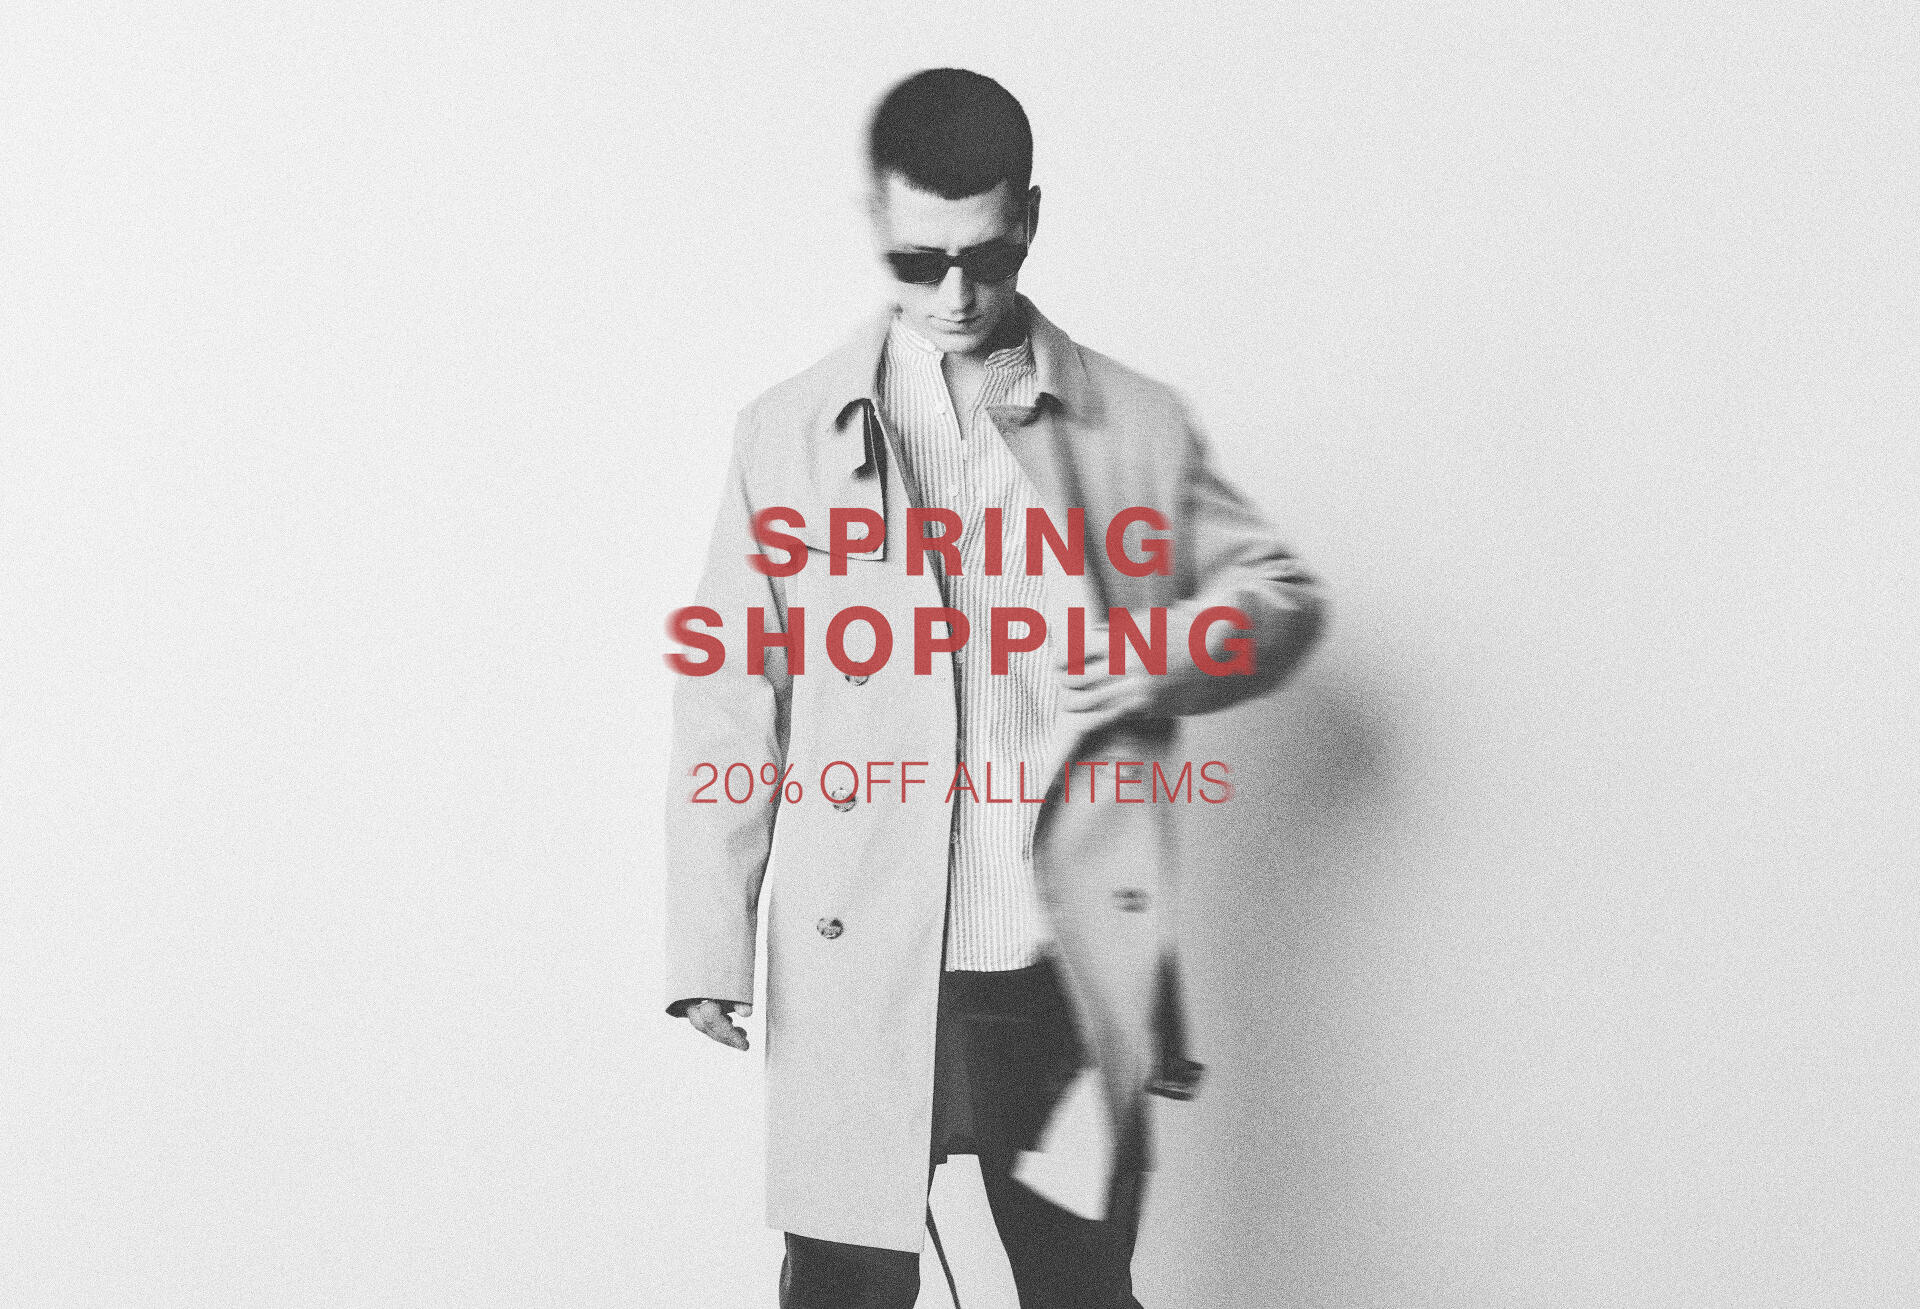 Spring Shopping 20% off all items